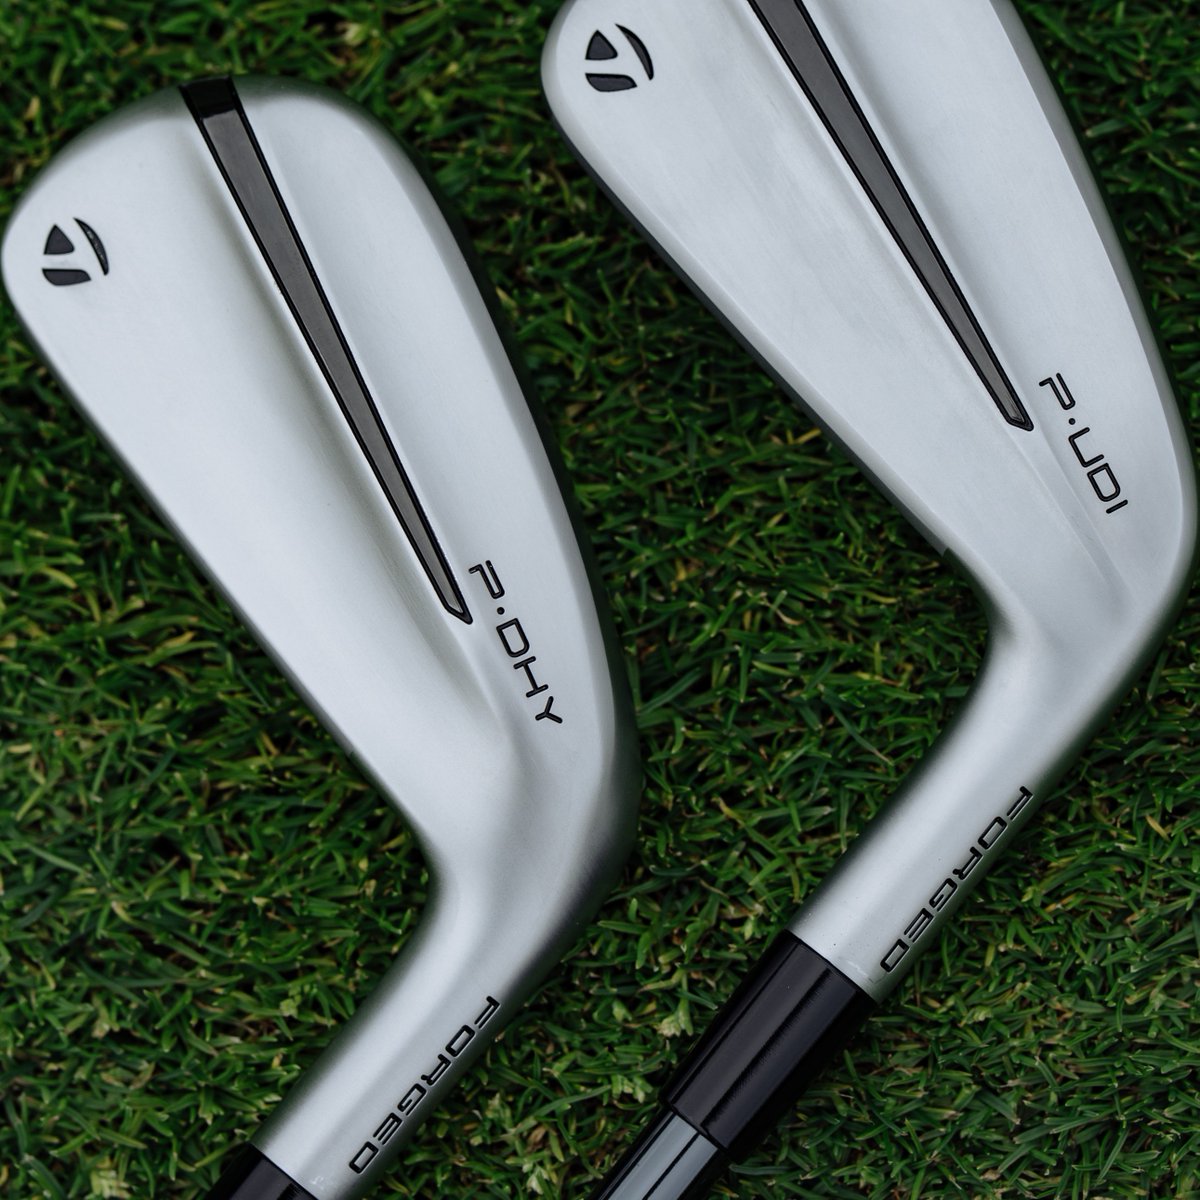 From Piercing Performance to maximum versatility, discover the new P•UDI and P•DHY from TaylorMade Shop: bit.ly/4dqqBQQ Learn More: bit.ly/3wkLH2g